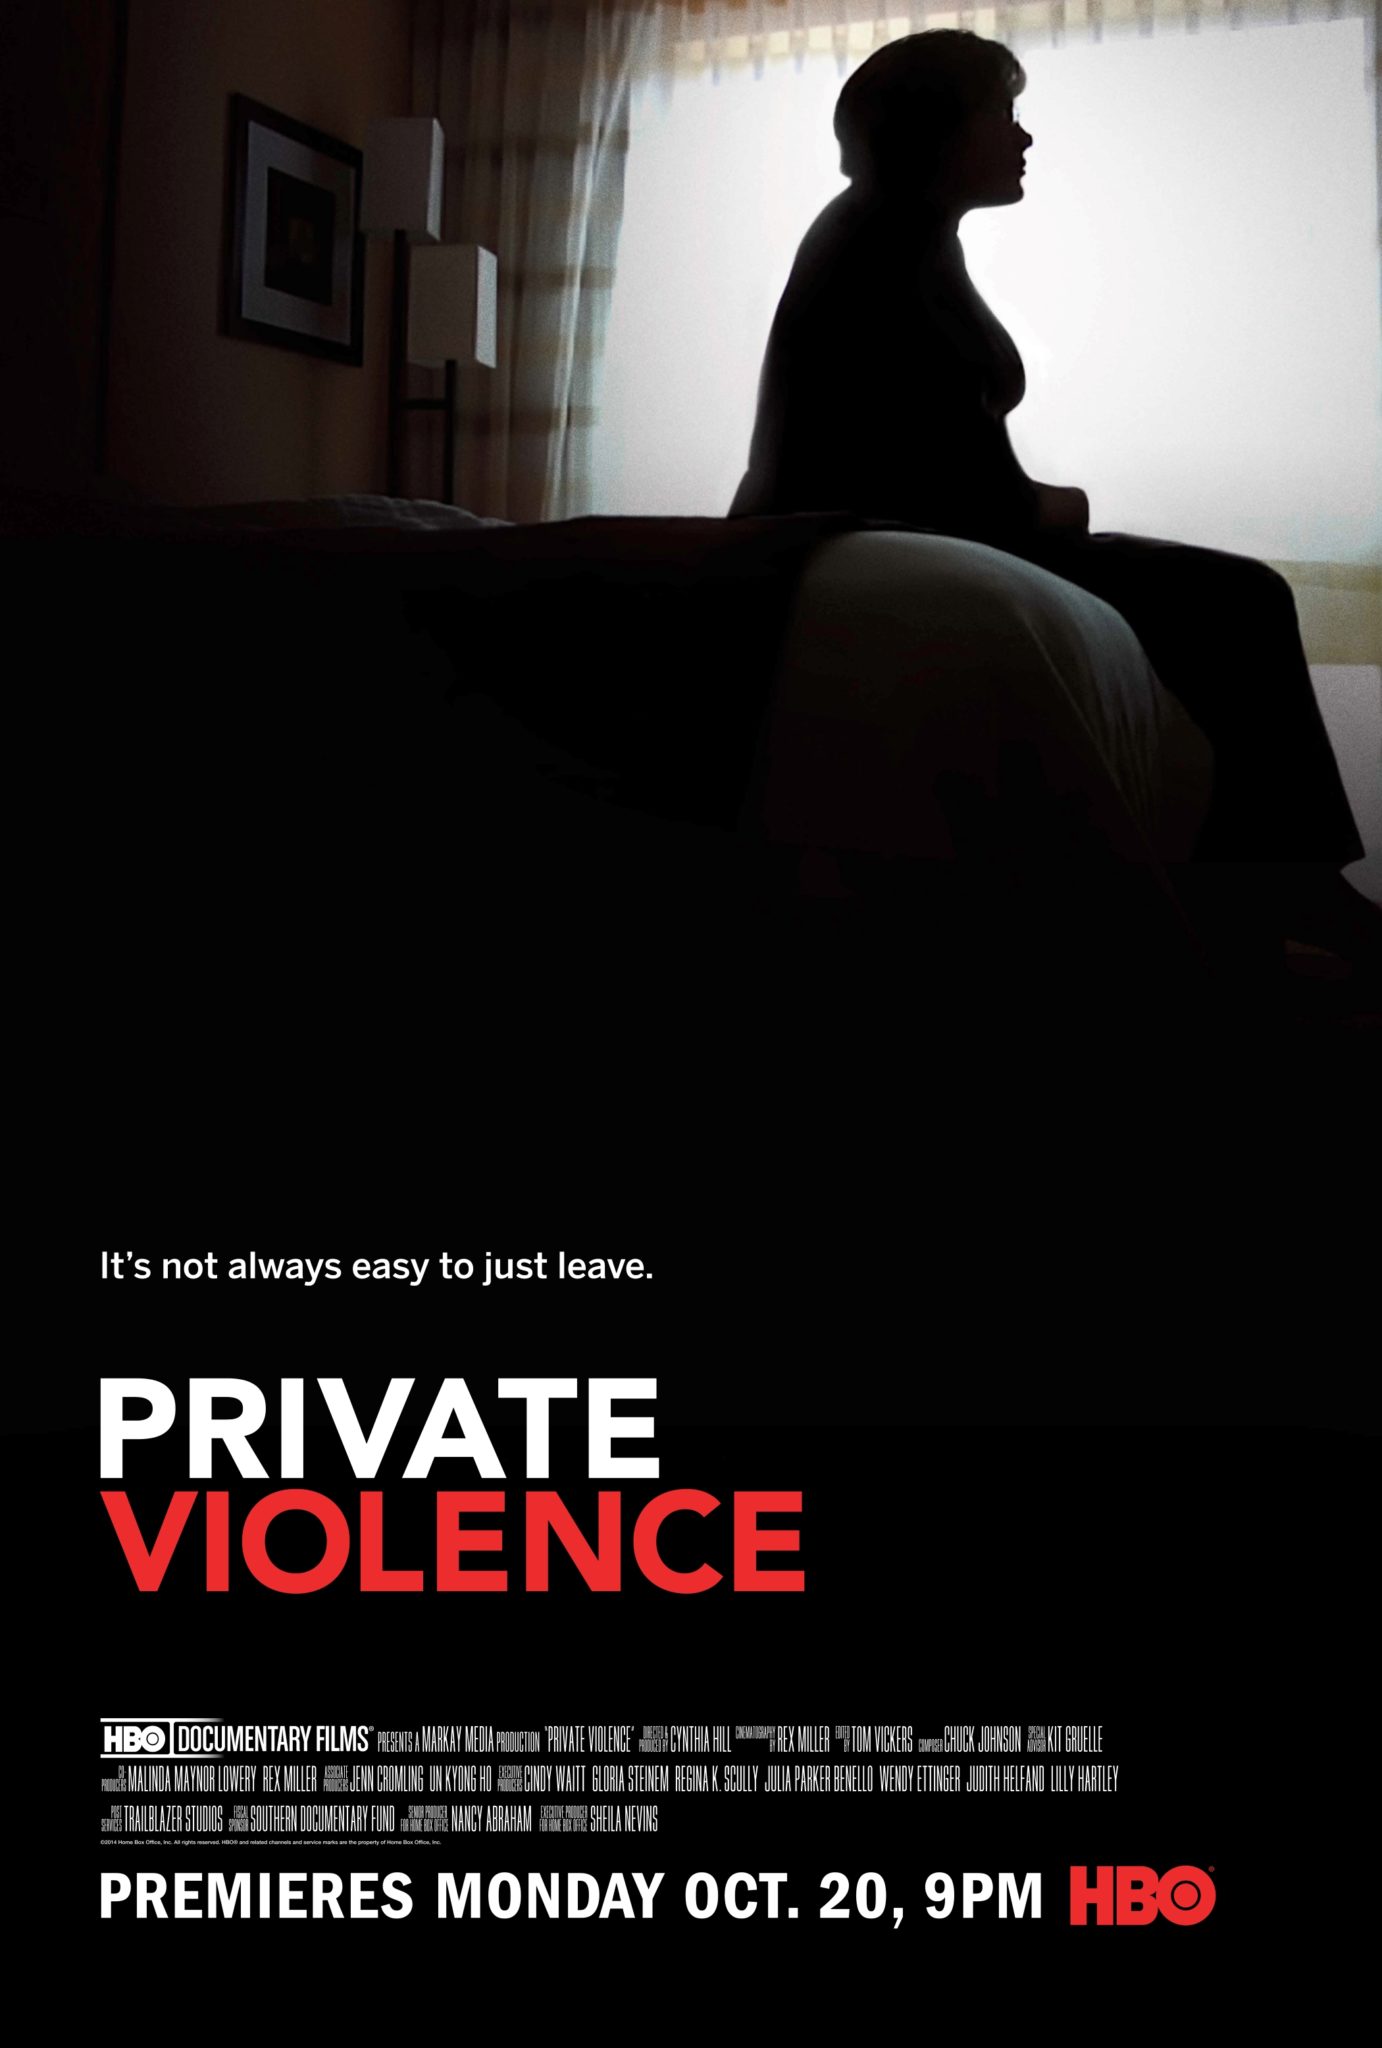 5 Movies About Domestic Violence to Stream Right Now - Palomar